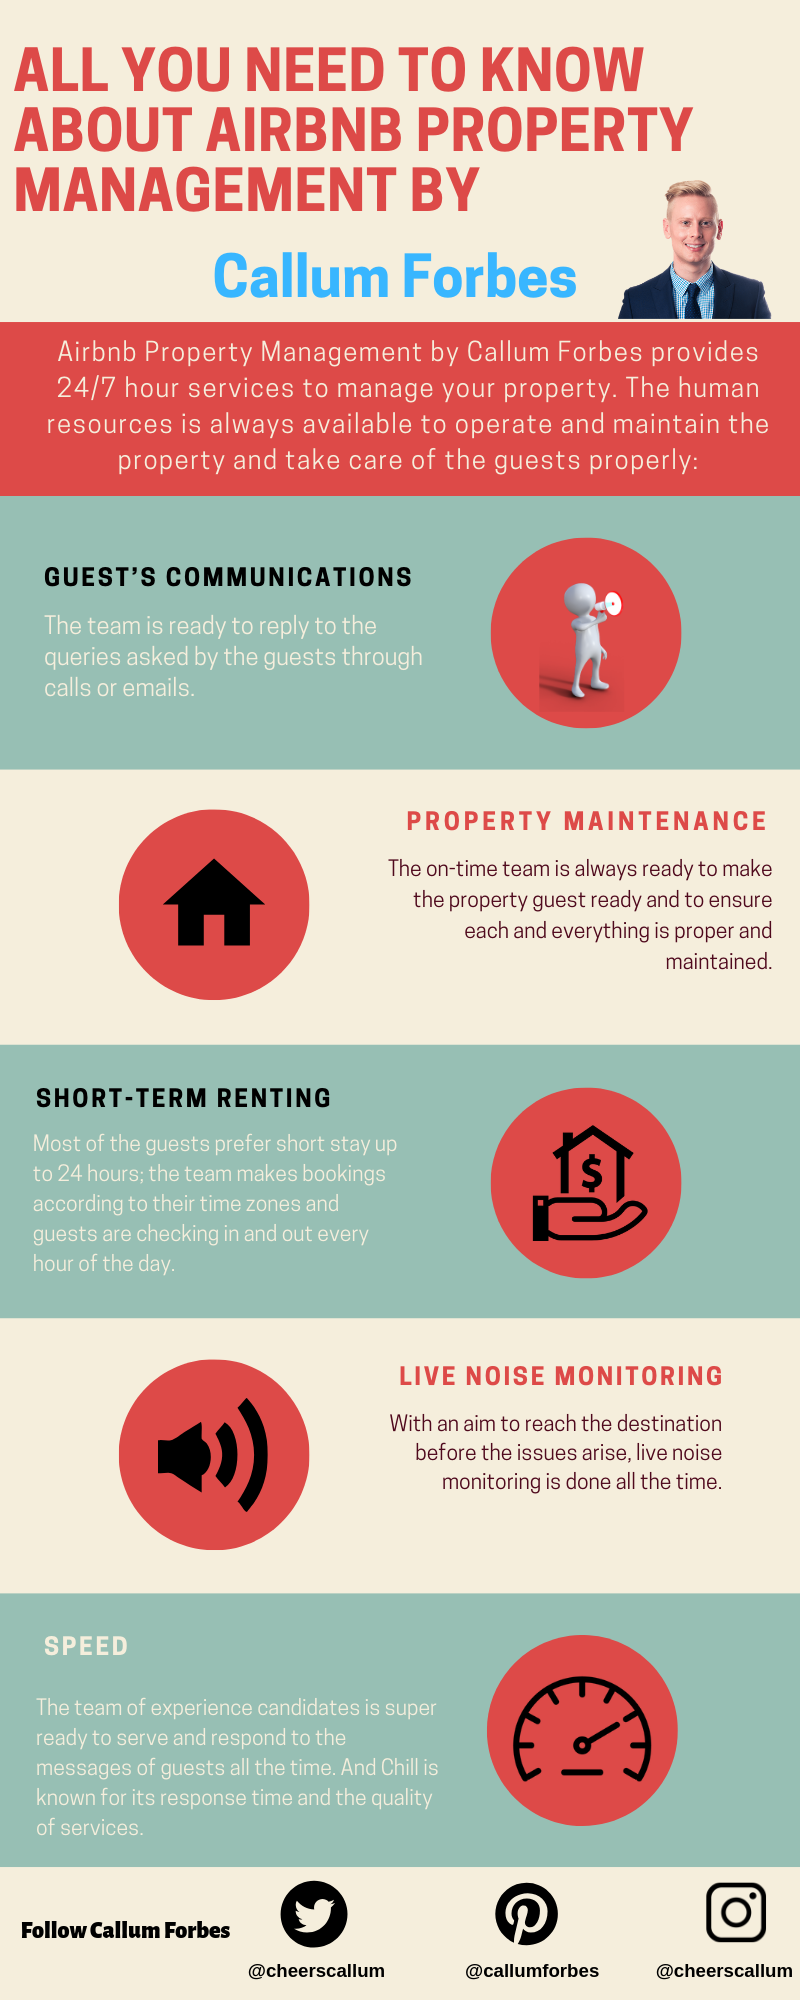 All You Need to Know About Airbnb Property Management by Callum Forbes